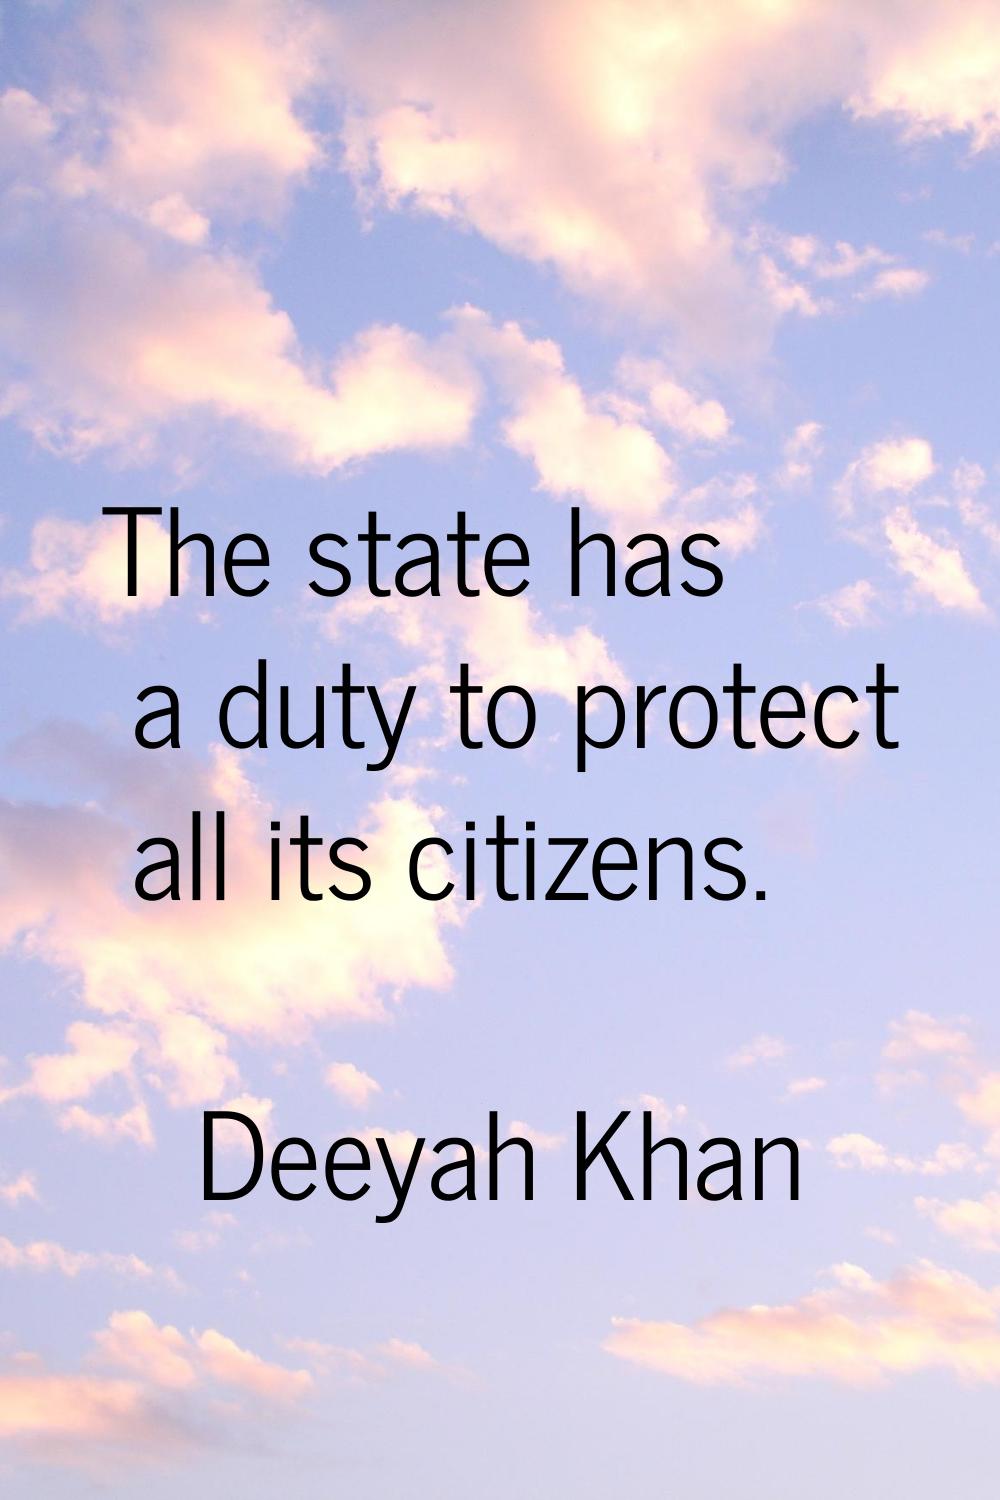 The state has a duty to protect all its citizens.